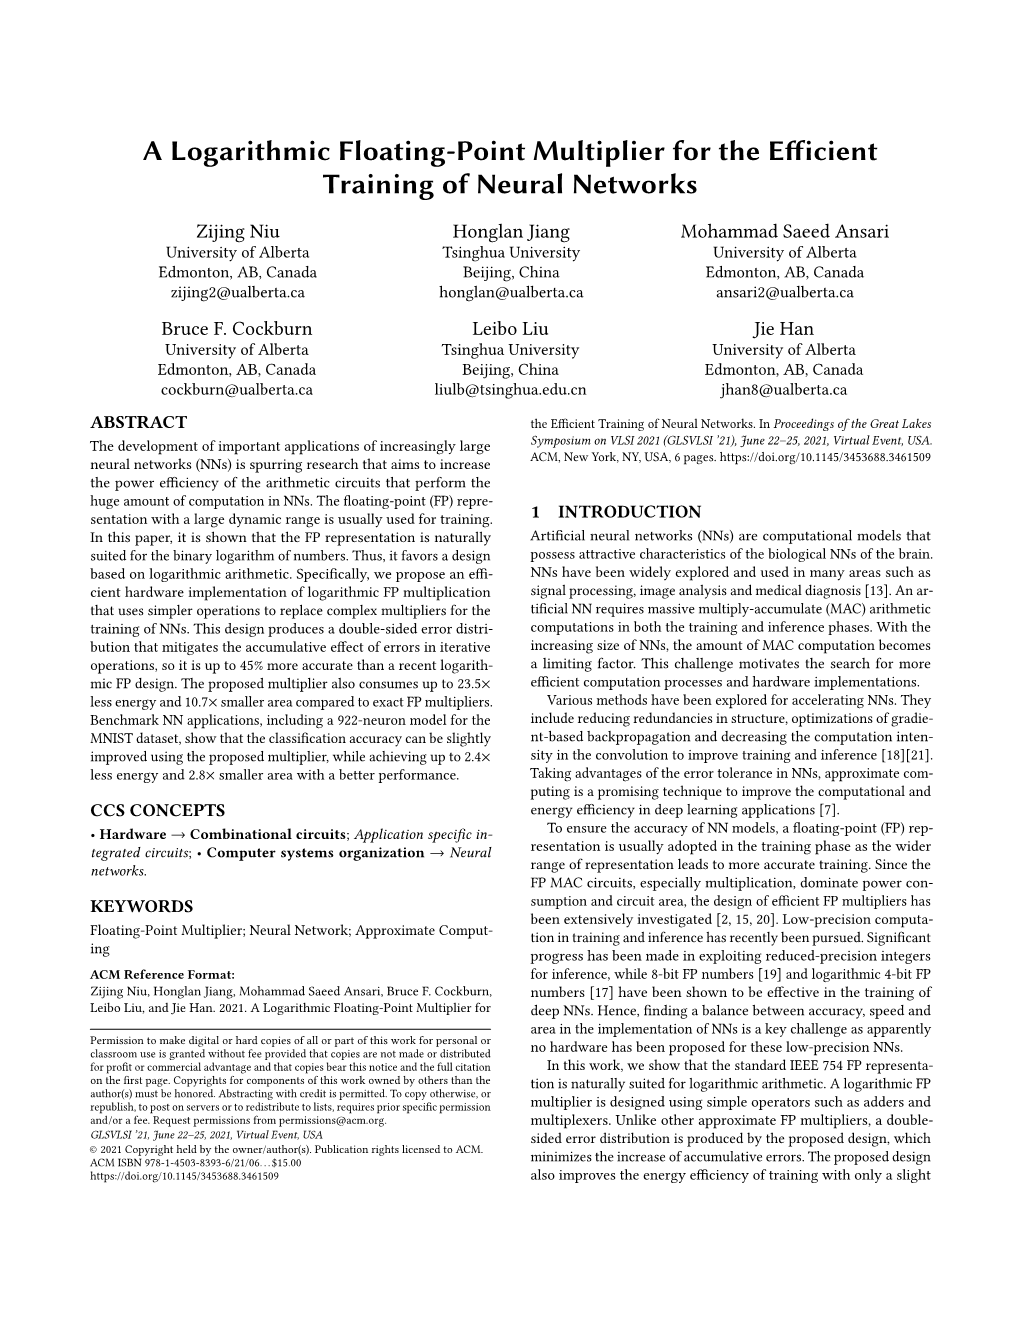 A Logarithmic Floating-Point Multiplier for the Efficient Training of Neural Networks